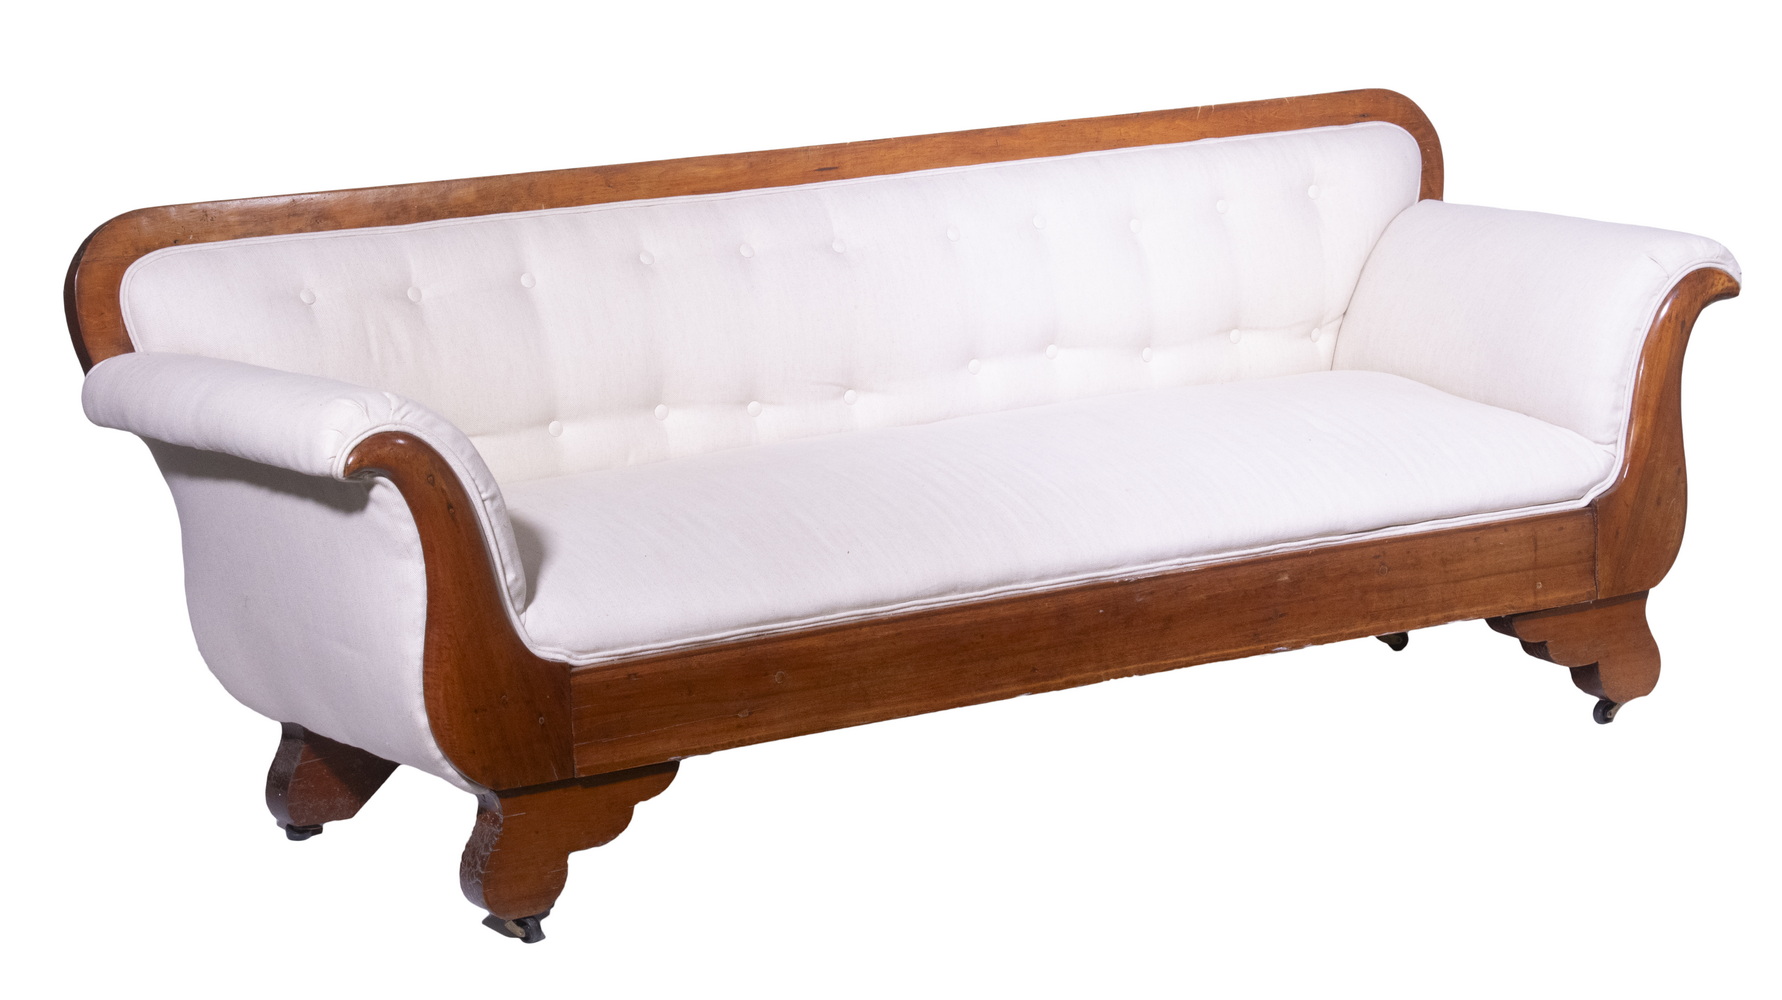 EMPIRE SOFA 19th C. Settee, with